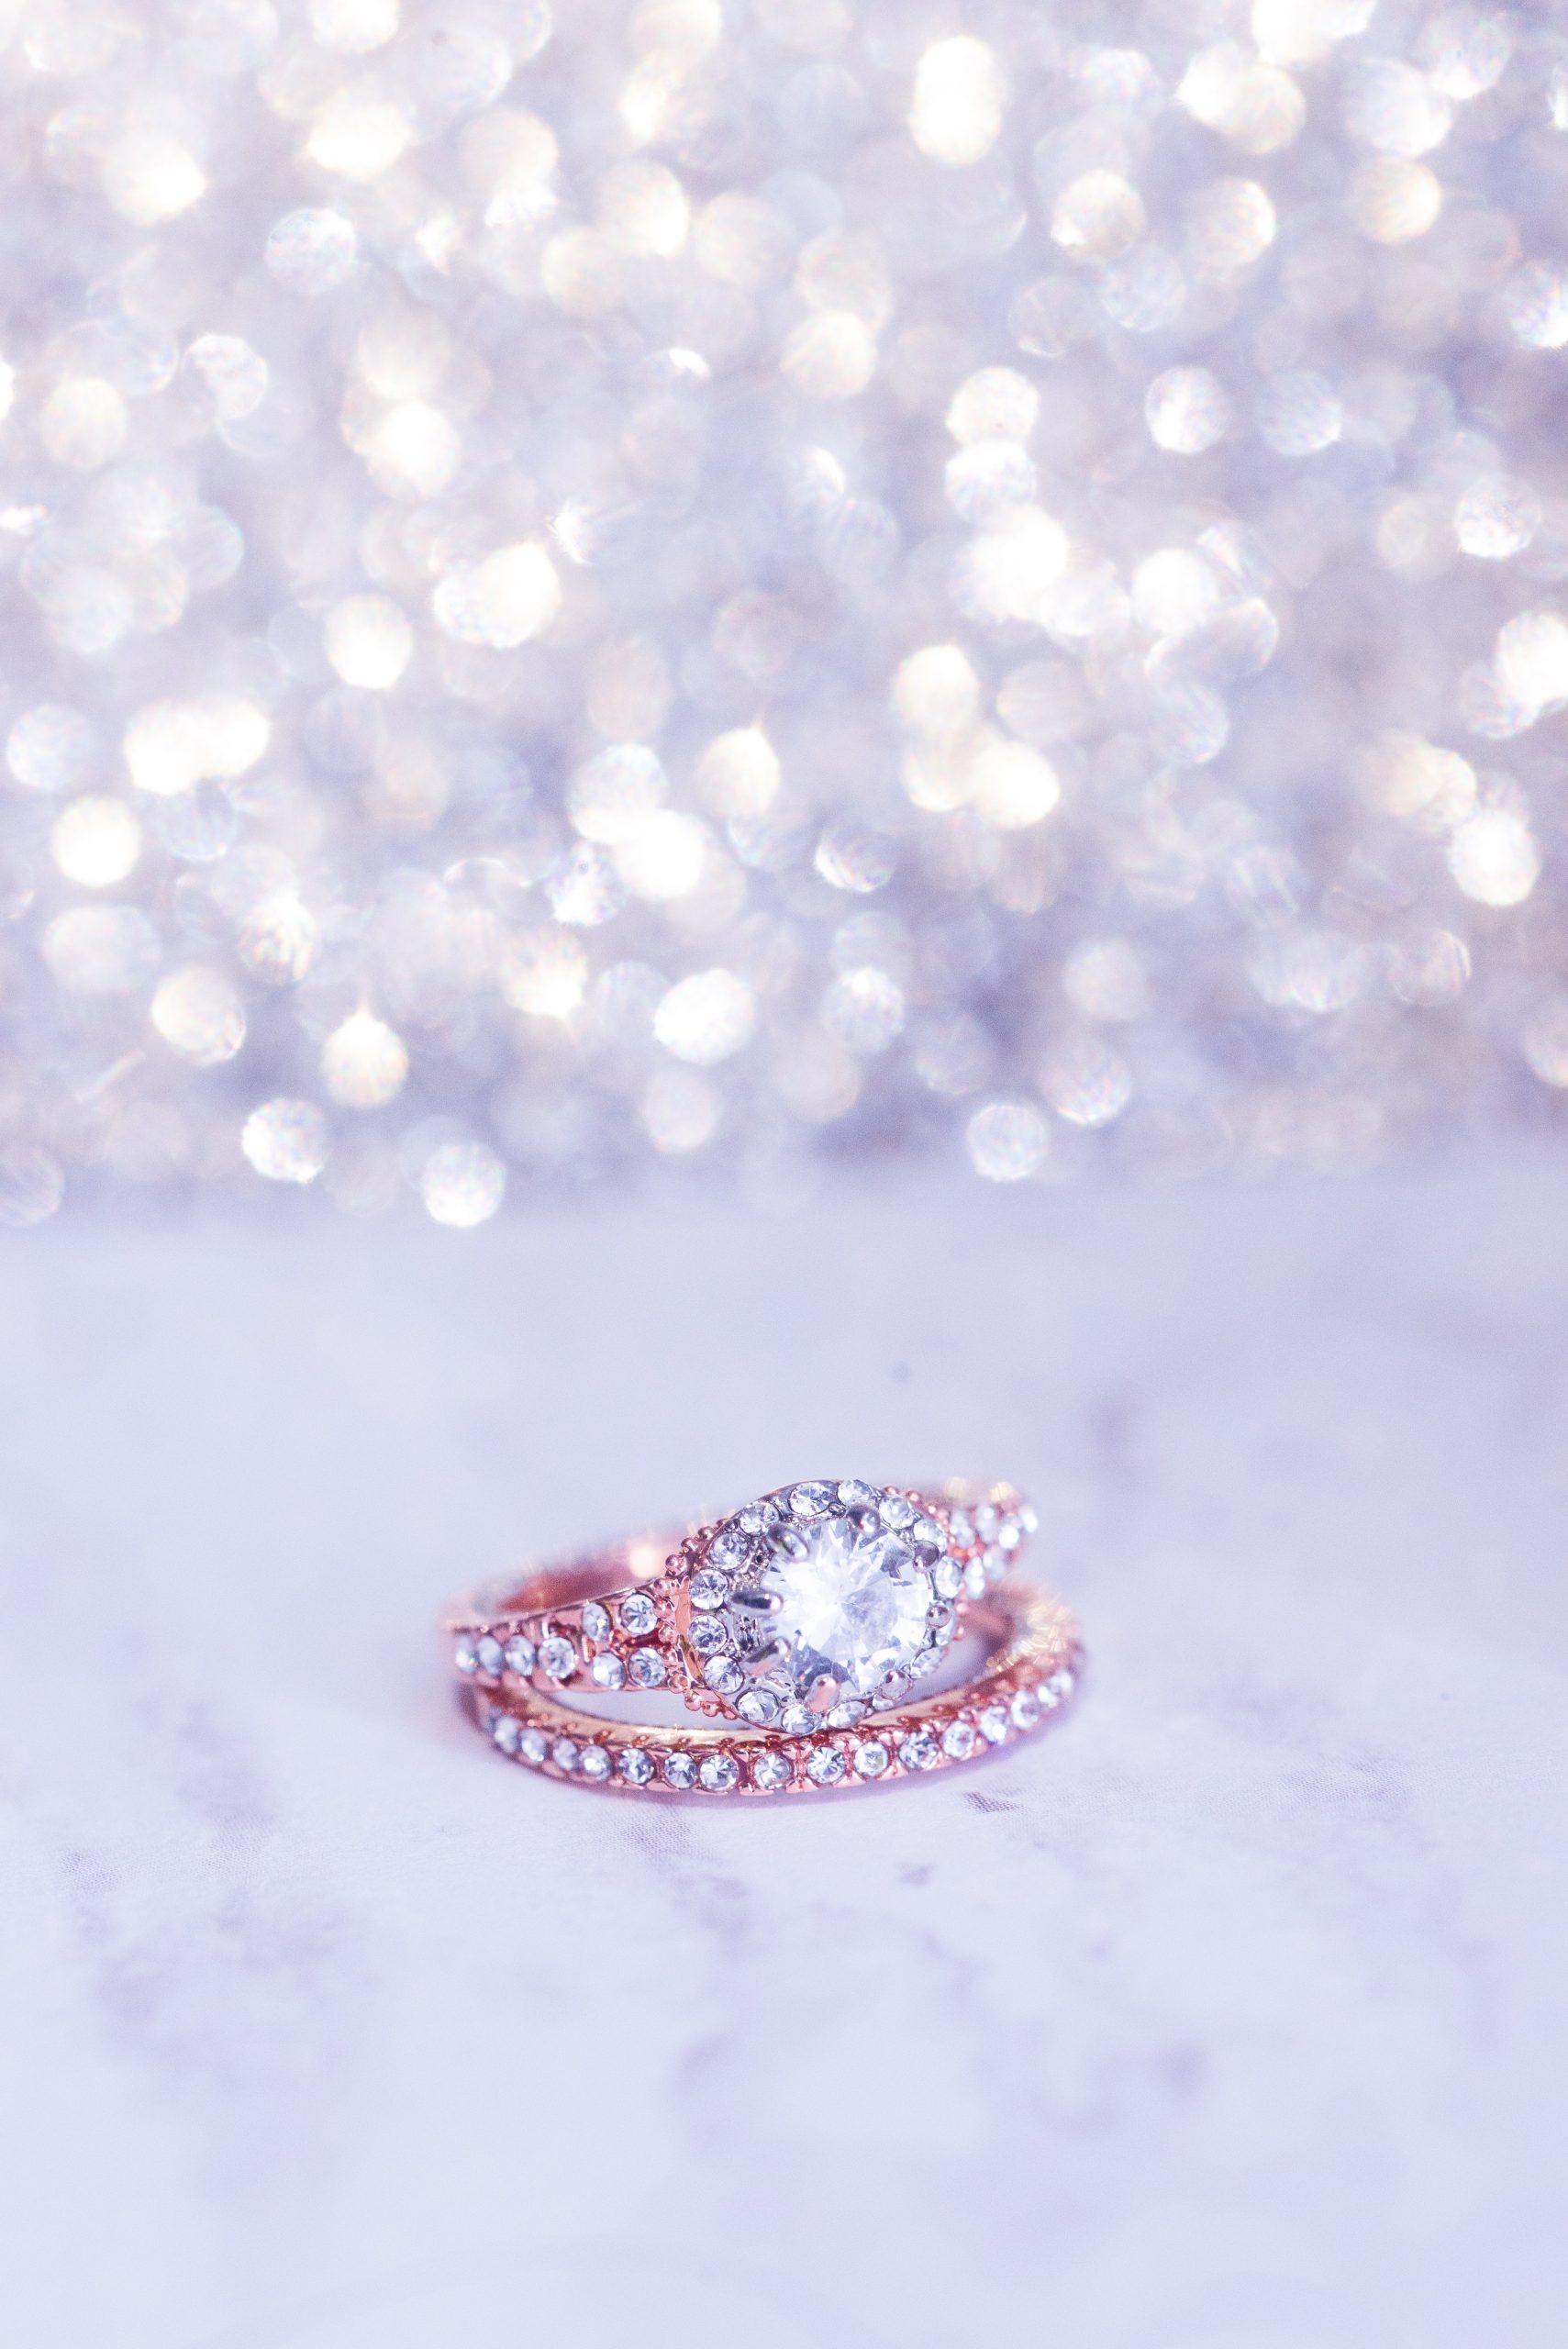 Tiffany True™ Engagement Ring with a Tiffany True™ Diamond and a Platinum Diamond  Band